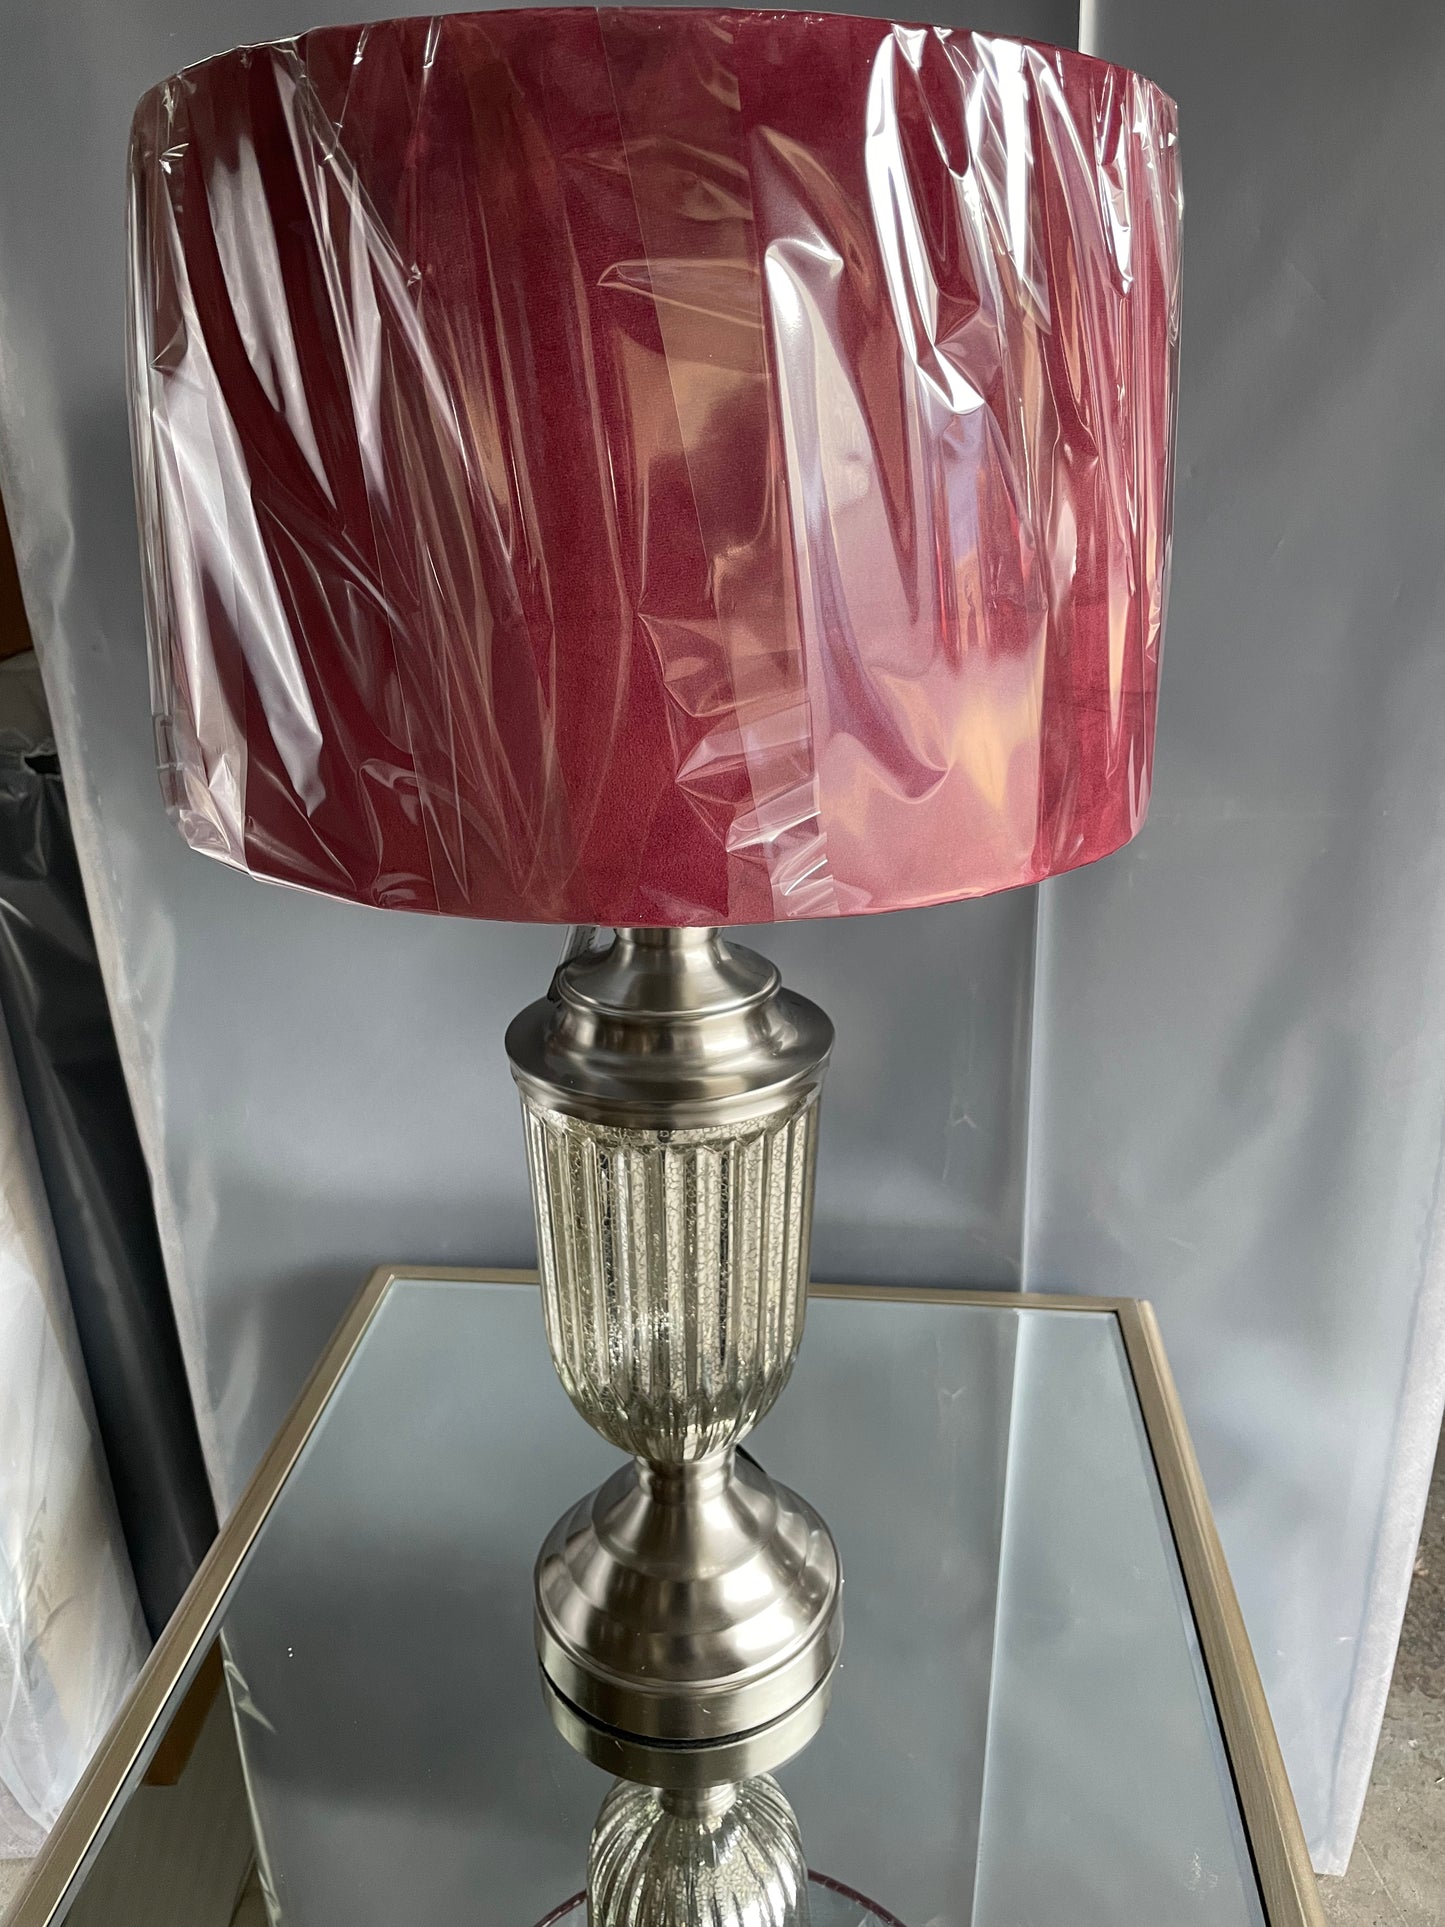 Table lamp with red shade mega clearance sale click n collect